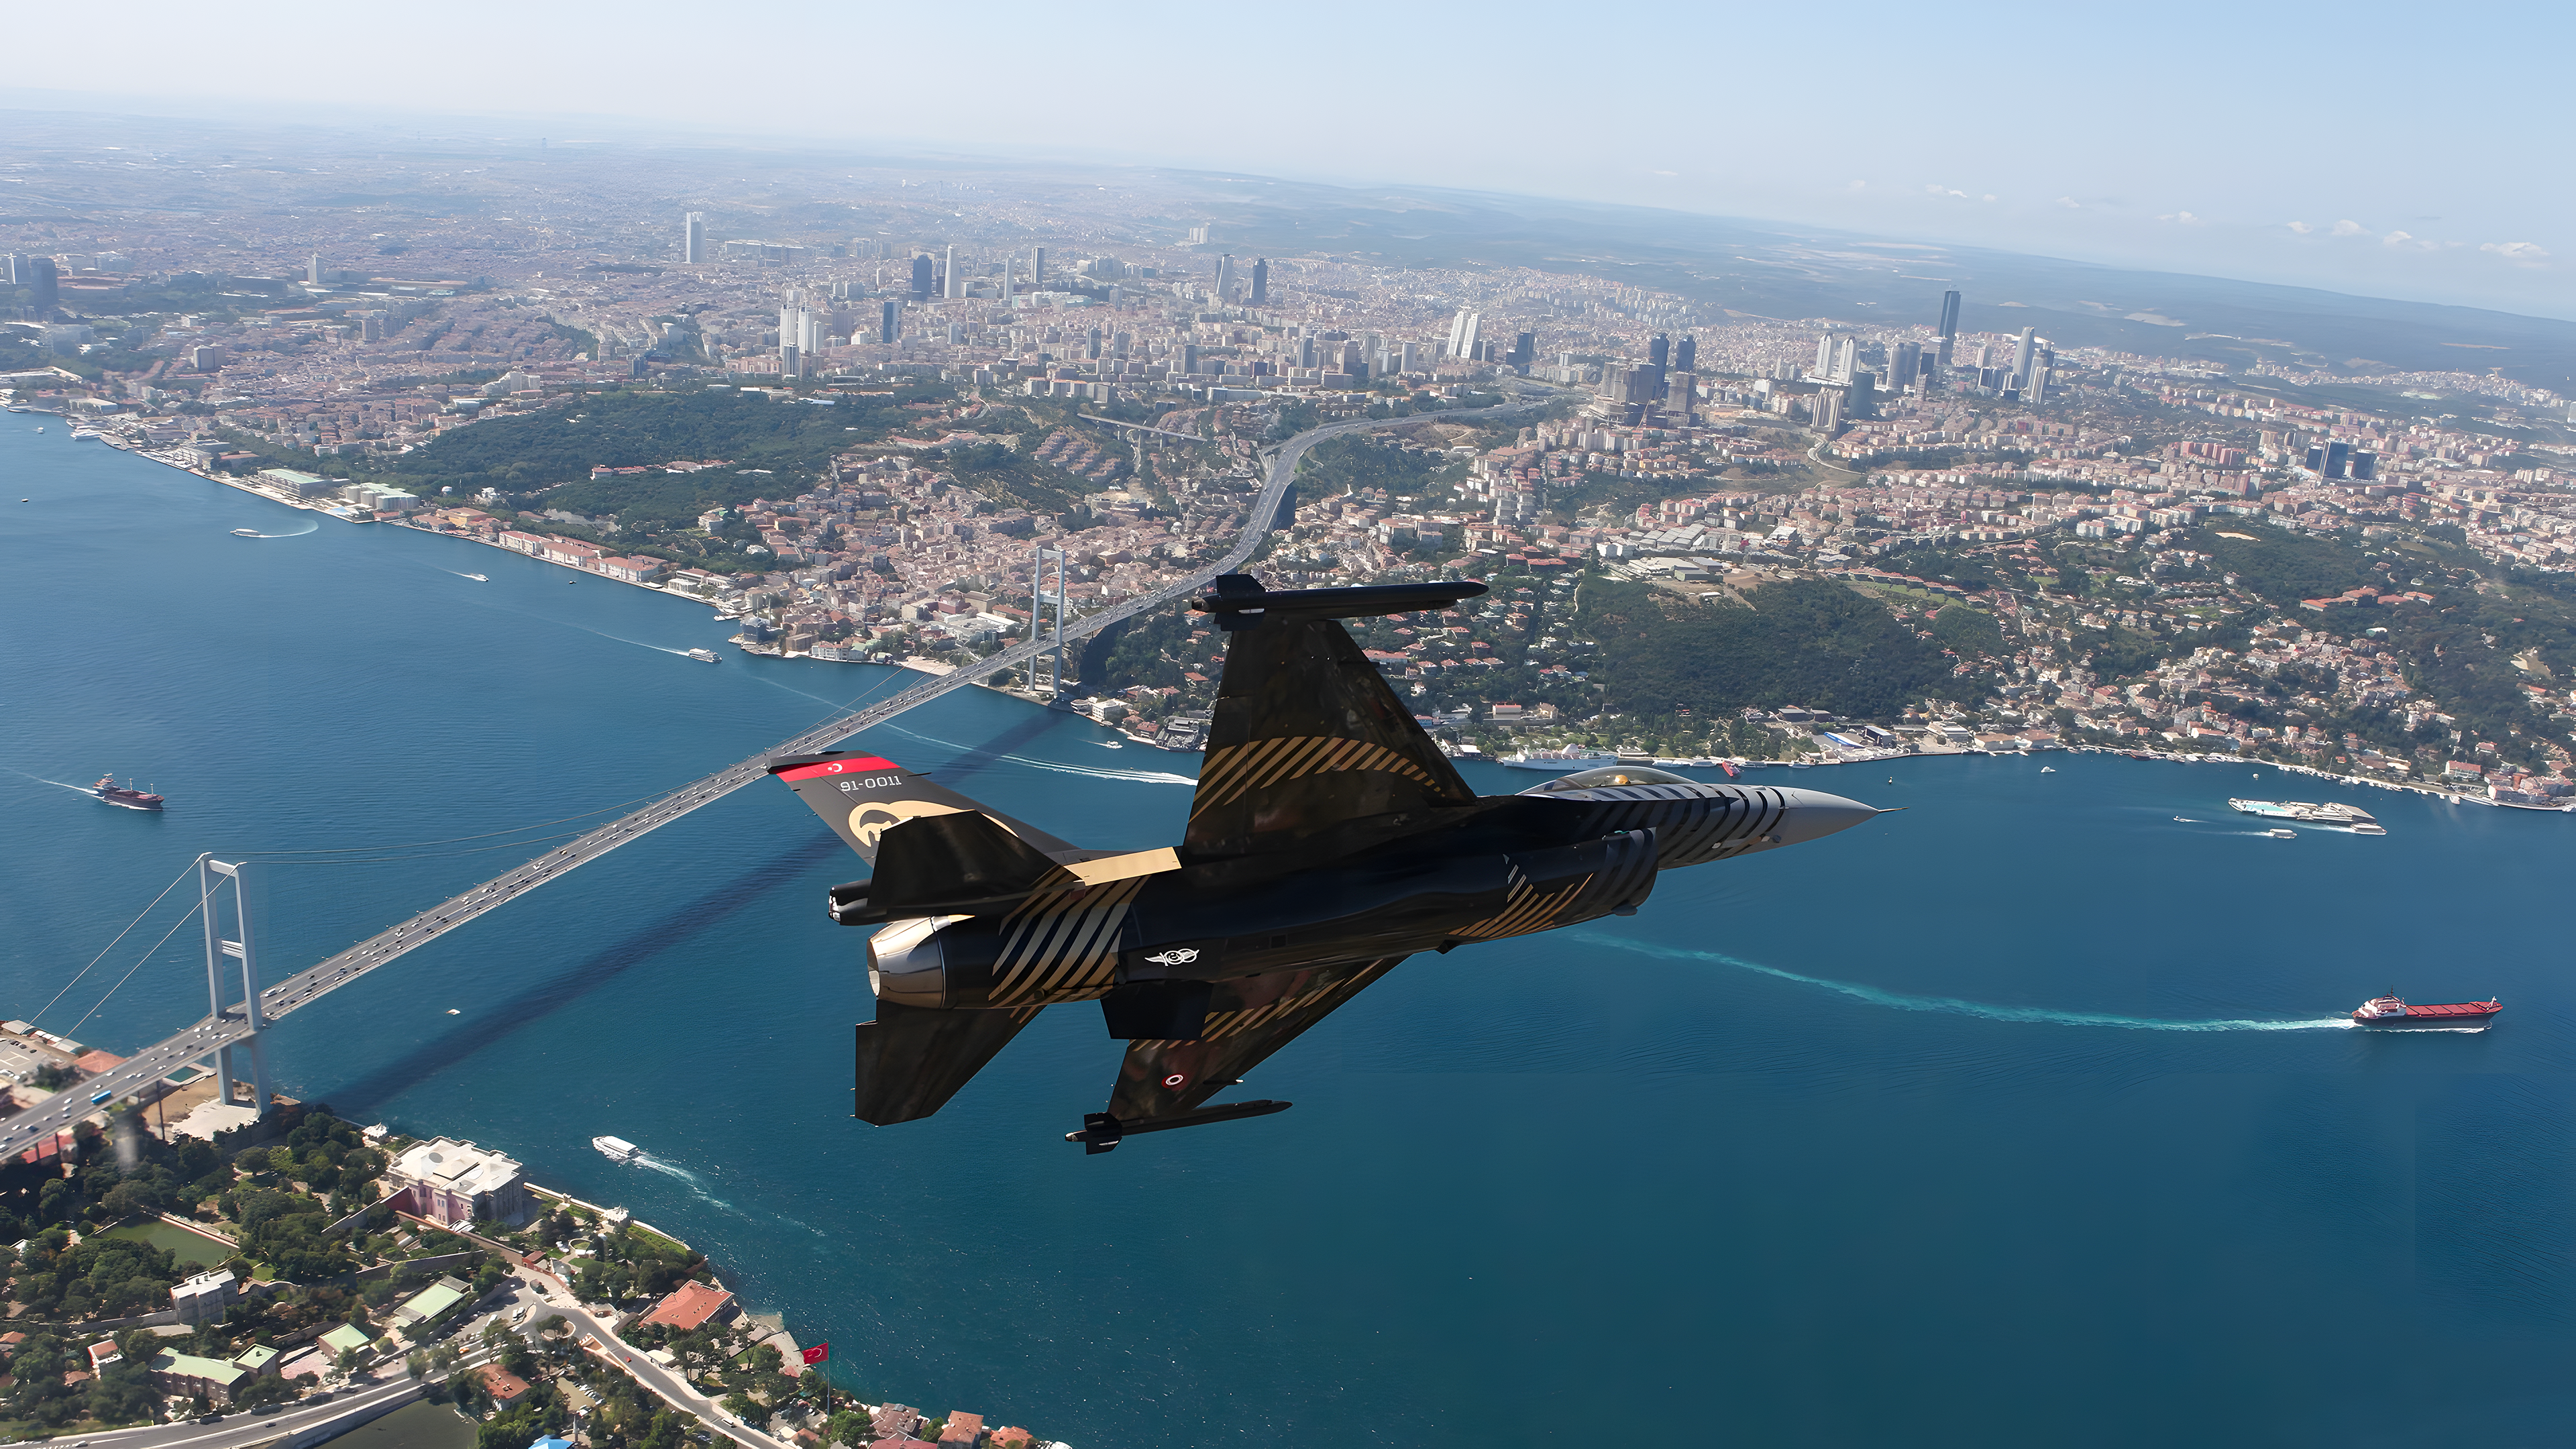 General 3840x2160 aircraft jet fighter Turkish Armed Forces Turkish air force Turkey SoloTurk General Dynamics F-16 Fighting Falcon sky bridge water cityscape building boat flying pilot military military vehicle